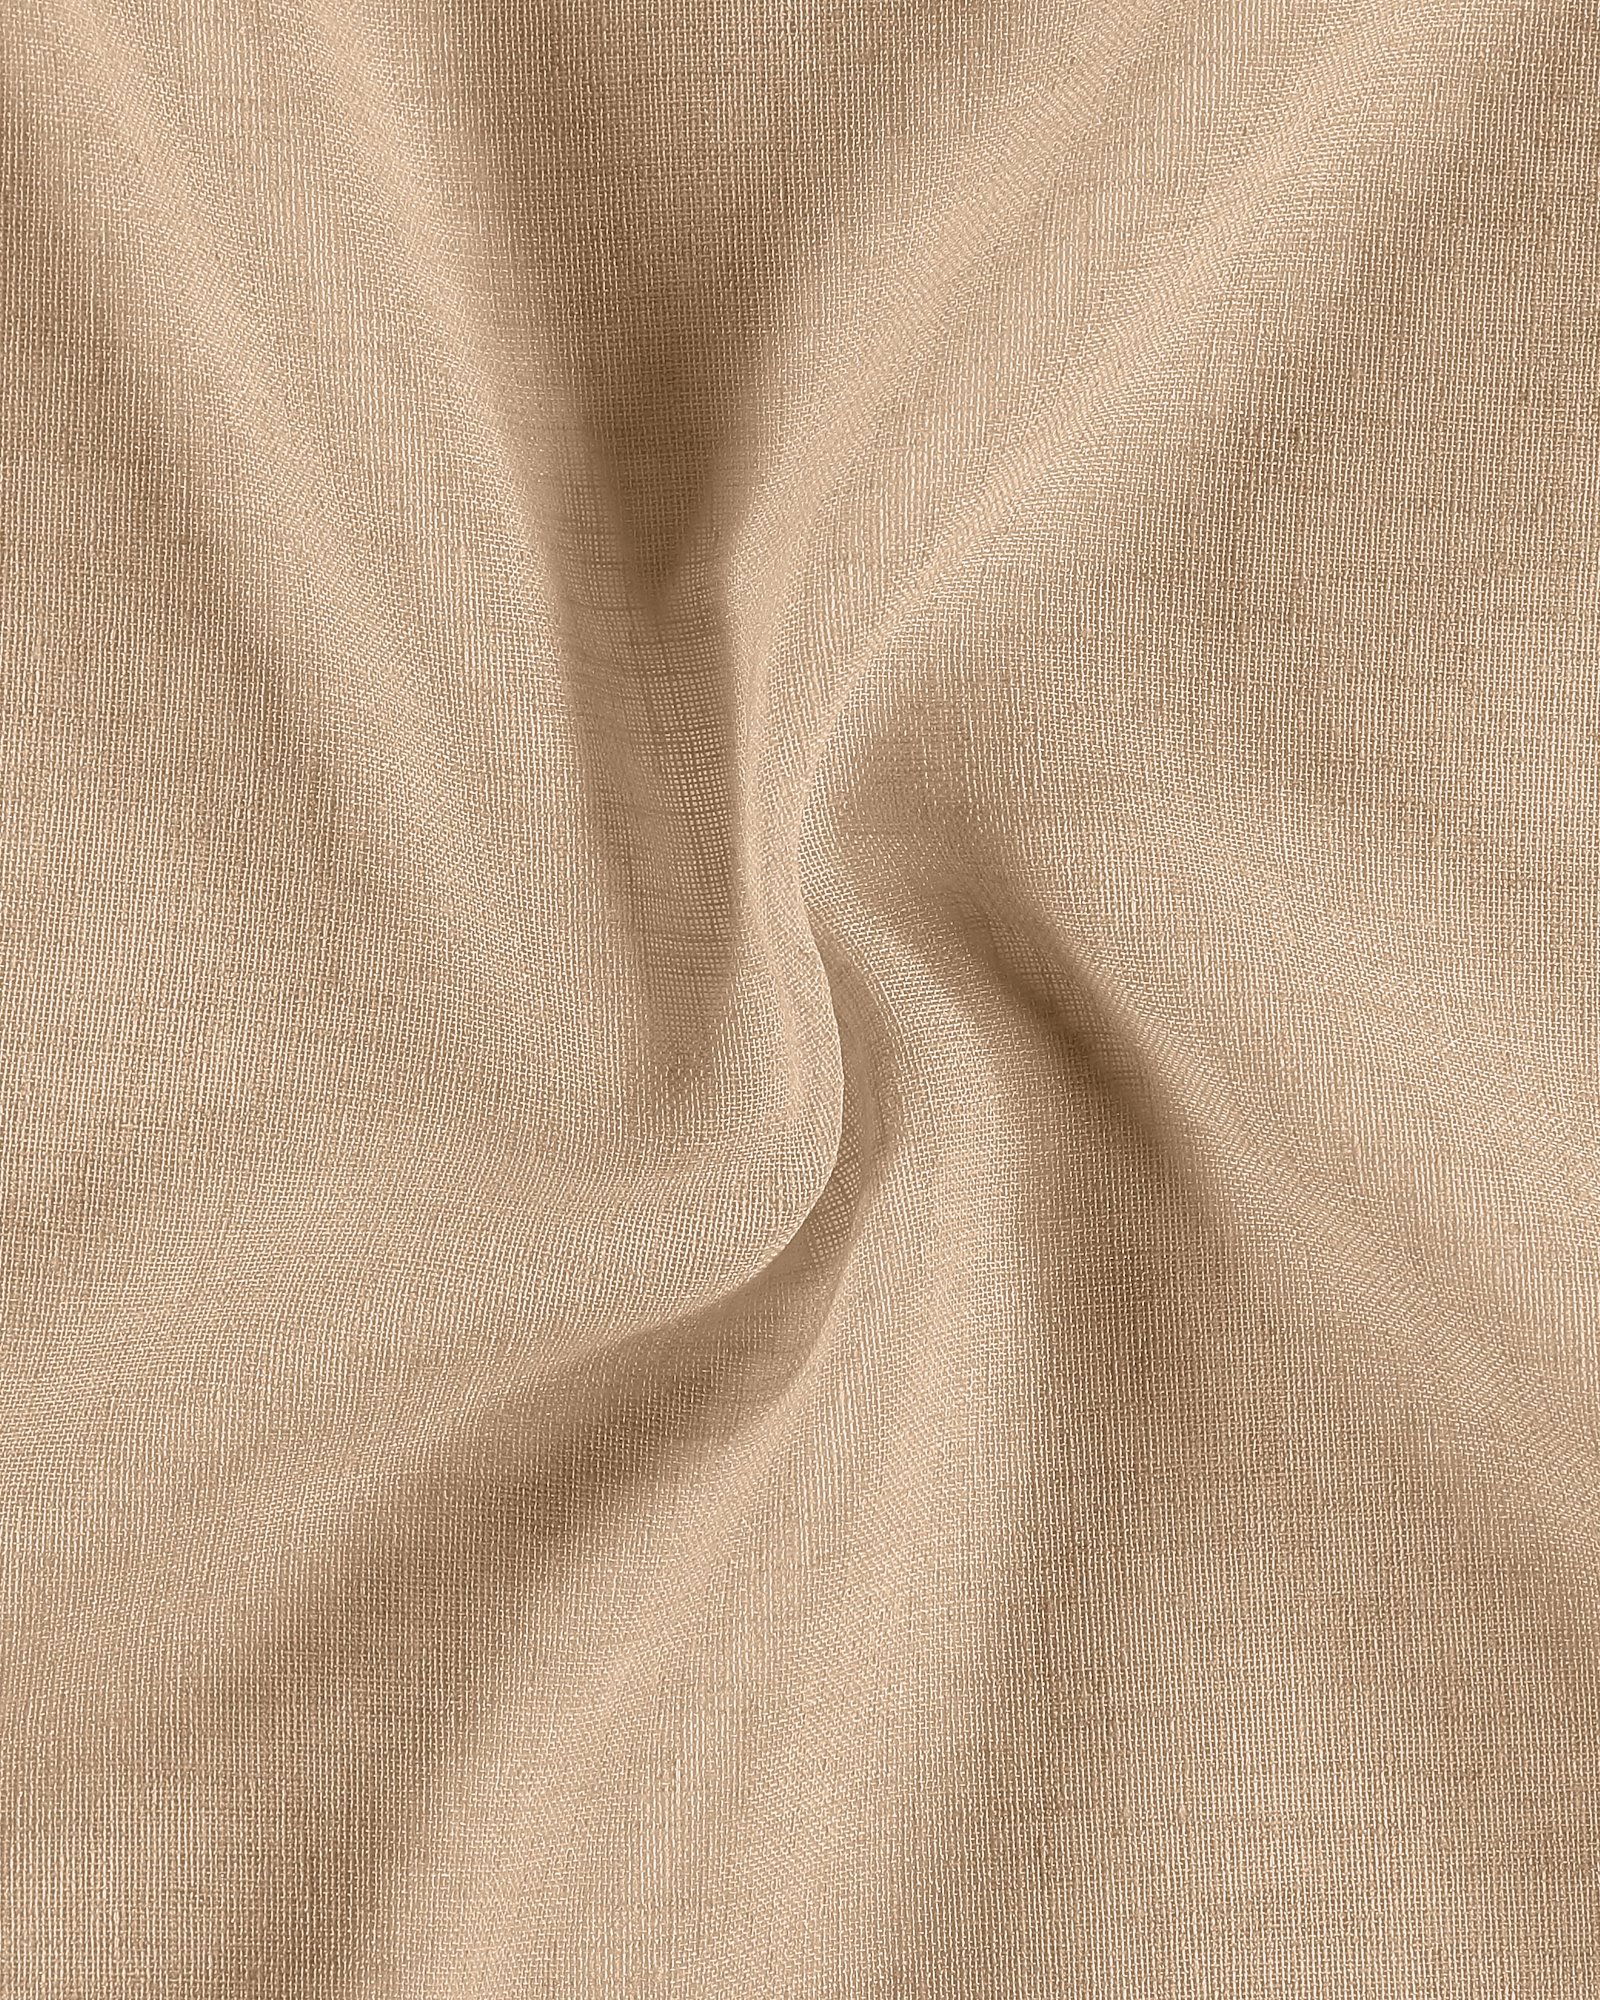 Voile linen look structure 835017_pack